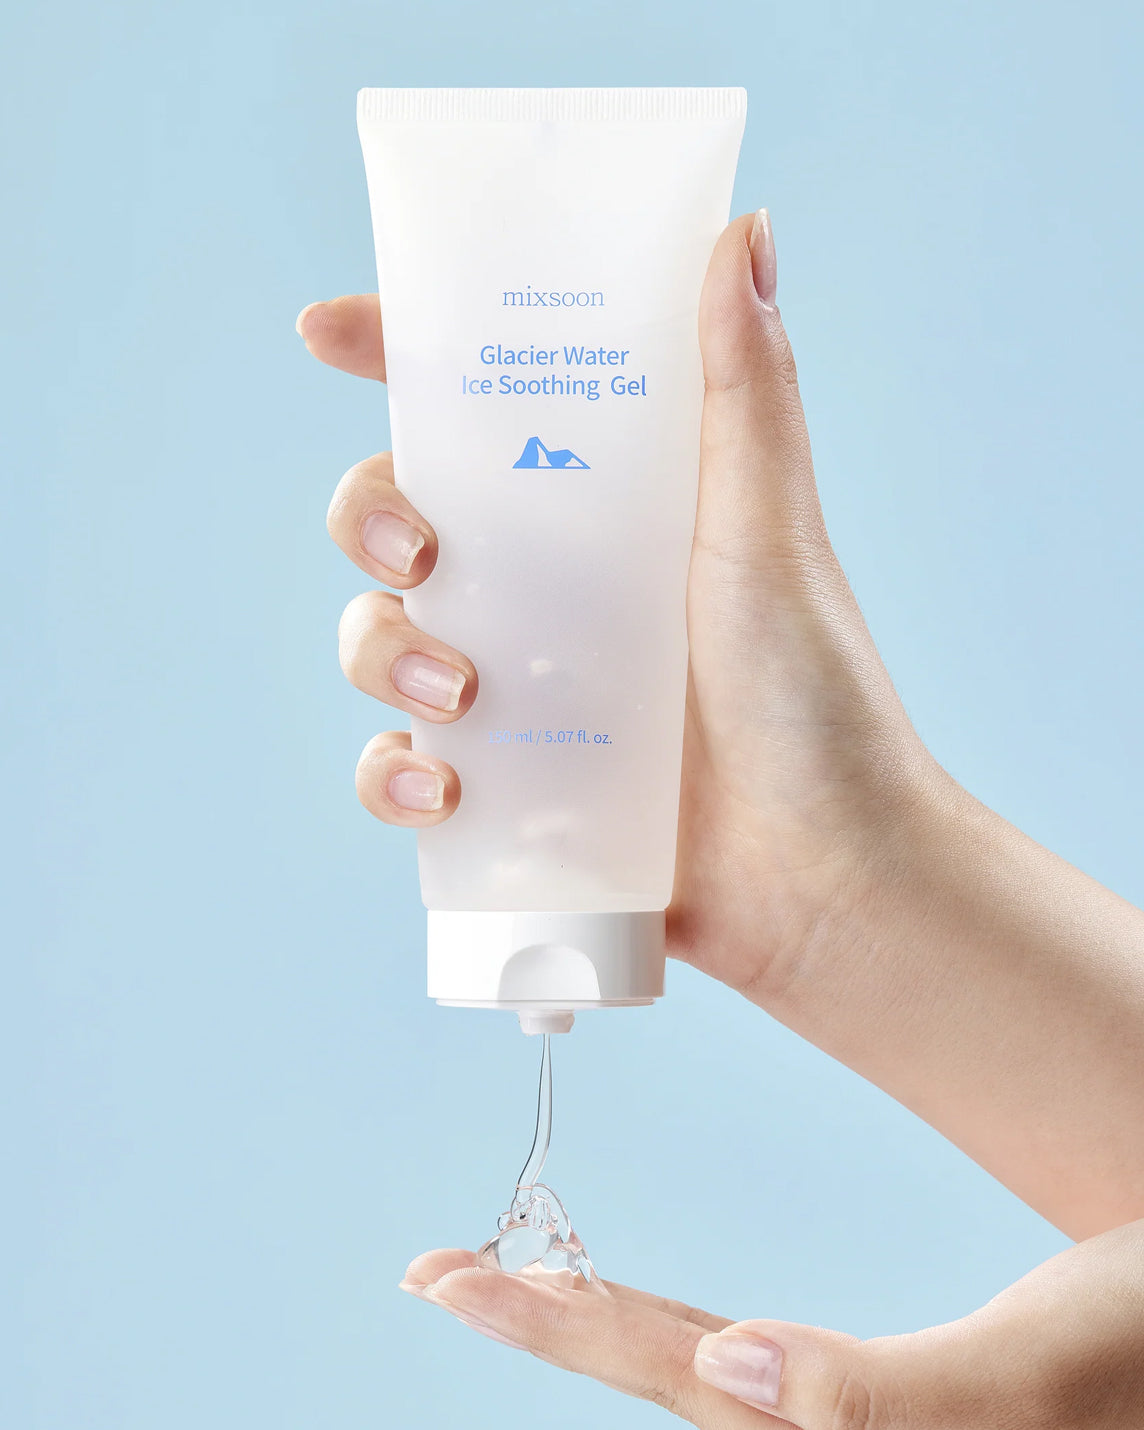 Mixsoon Summer Essential Master Cleanser and Glacier Water Gel